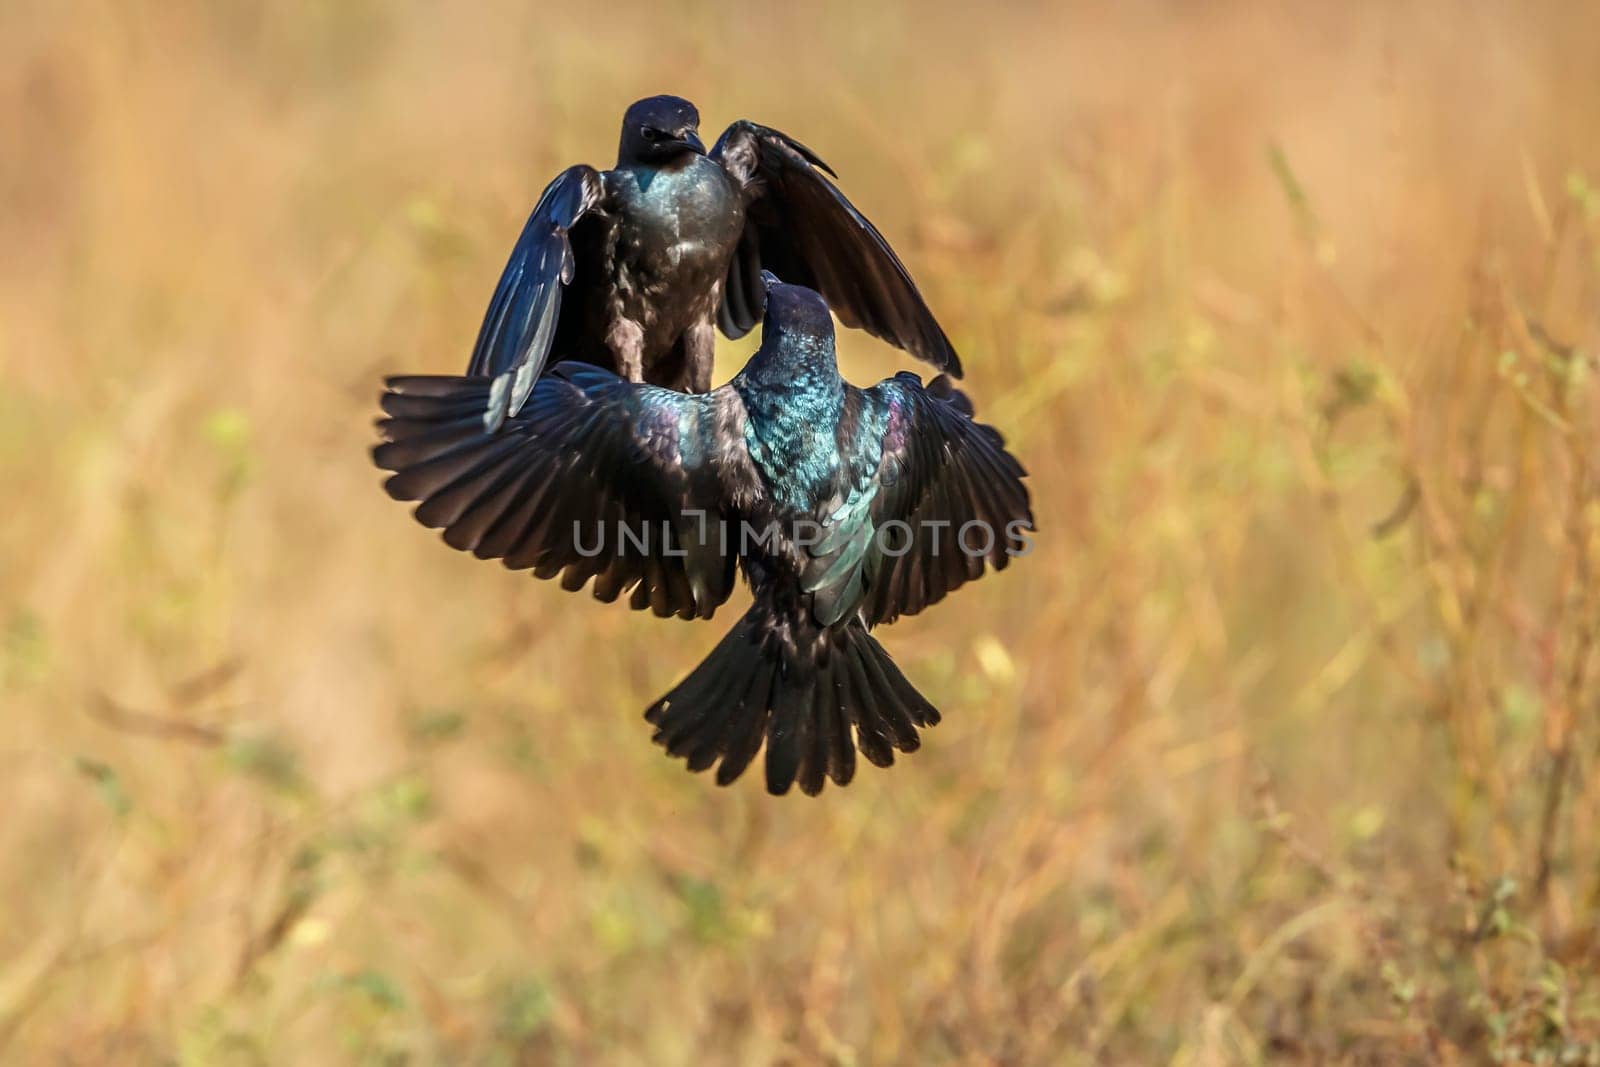 Cape glossy starling in Kruger national park, South Africa by PACOCOMO